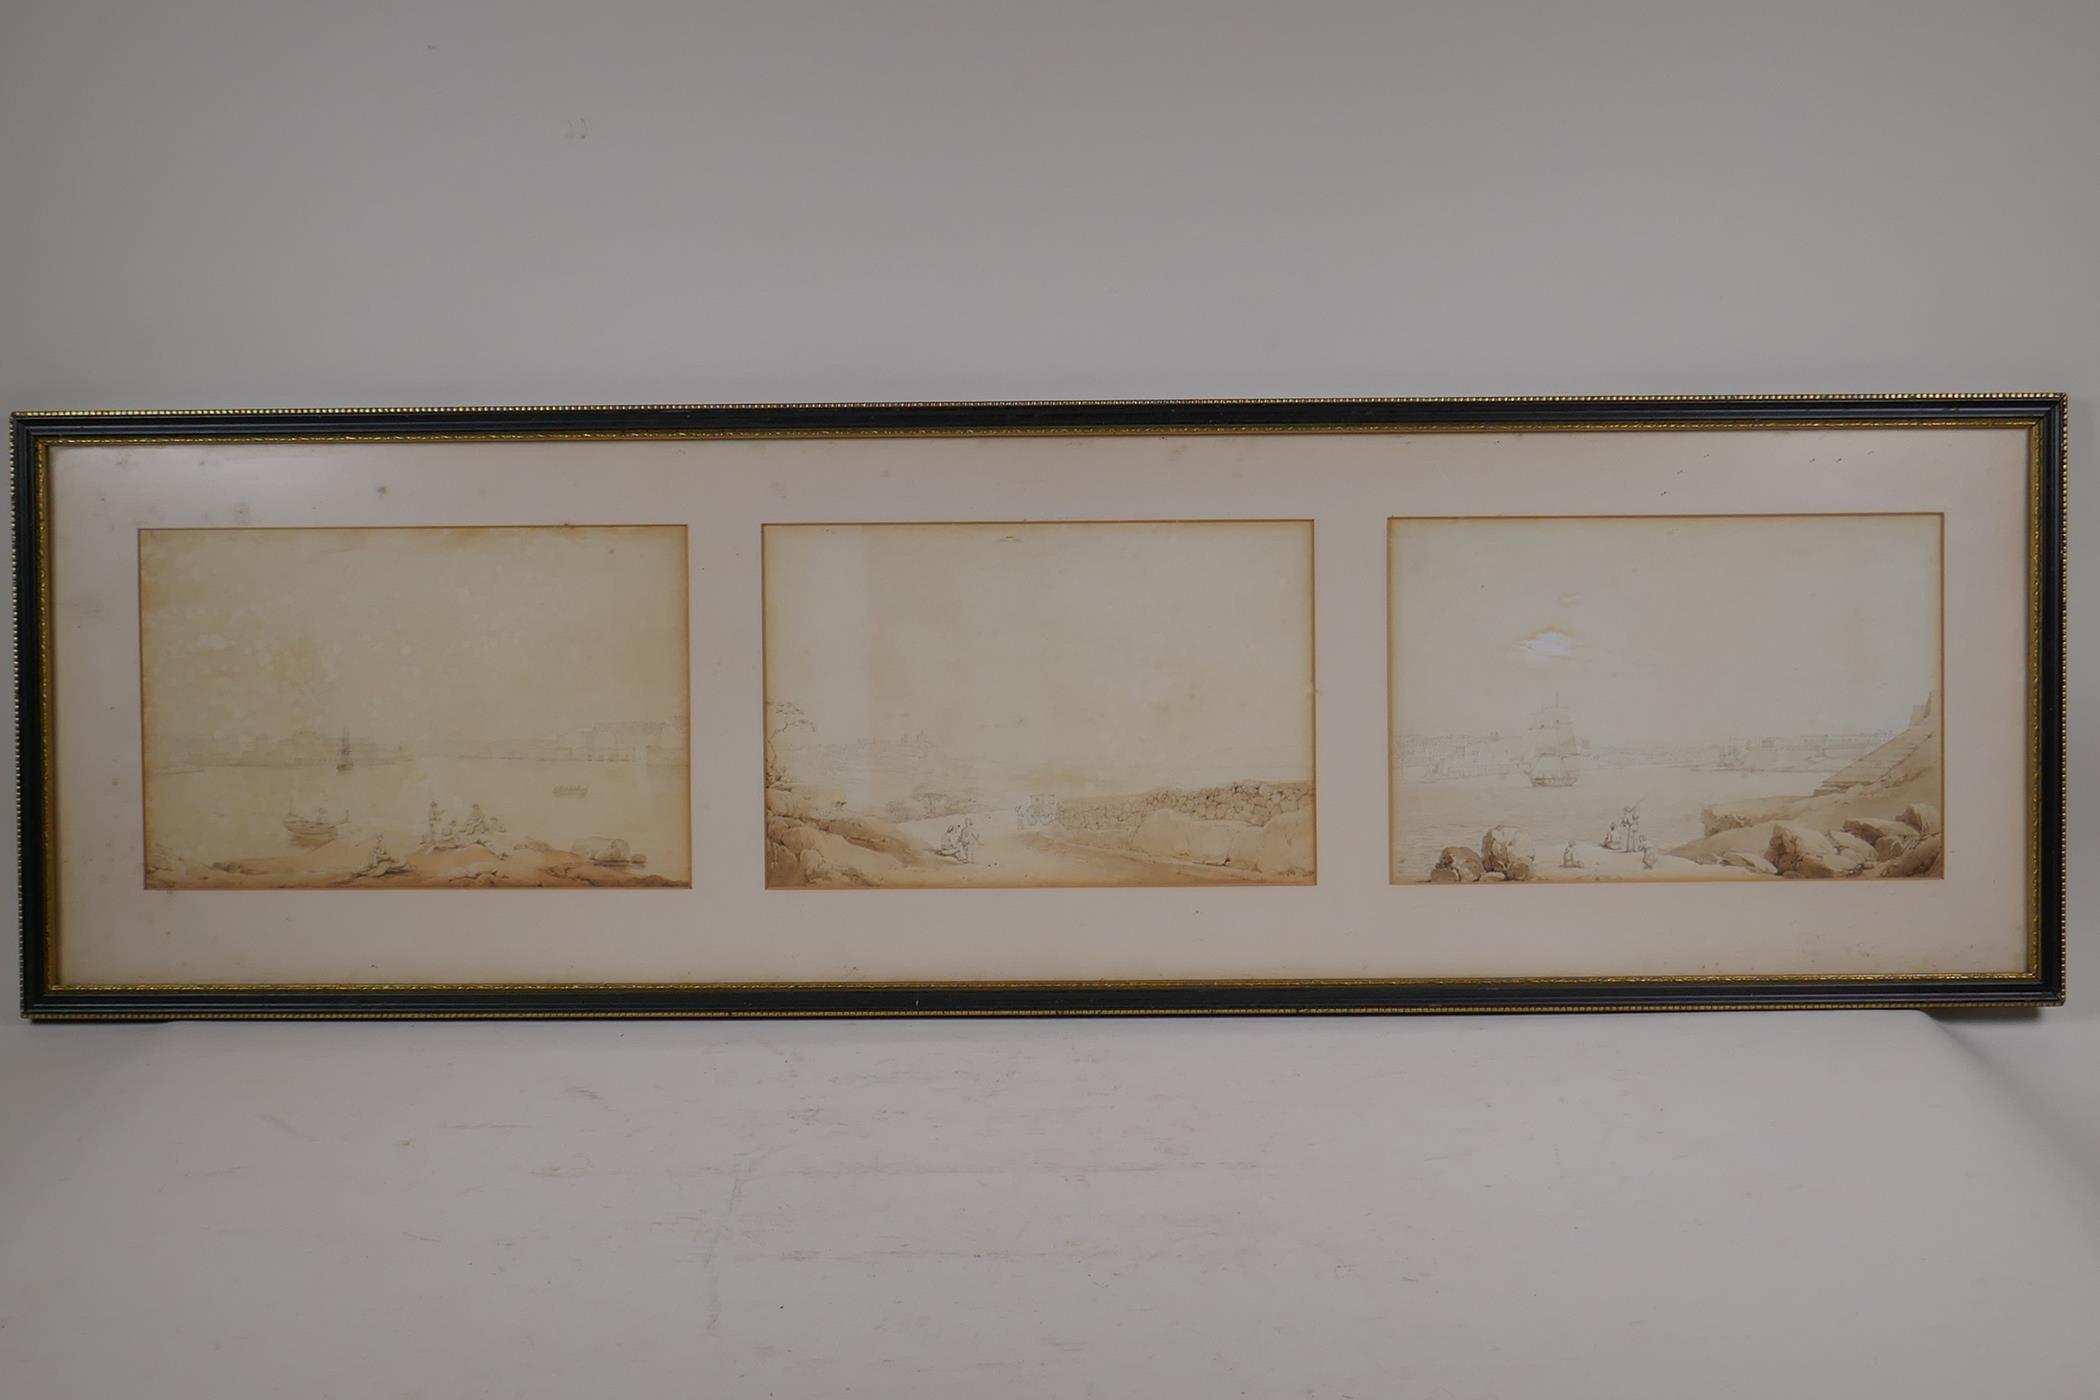 A C19th triptych, views of Valetta and the harbour, pencil and wash, unsigned, each 26 x 17cm